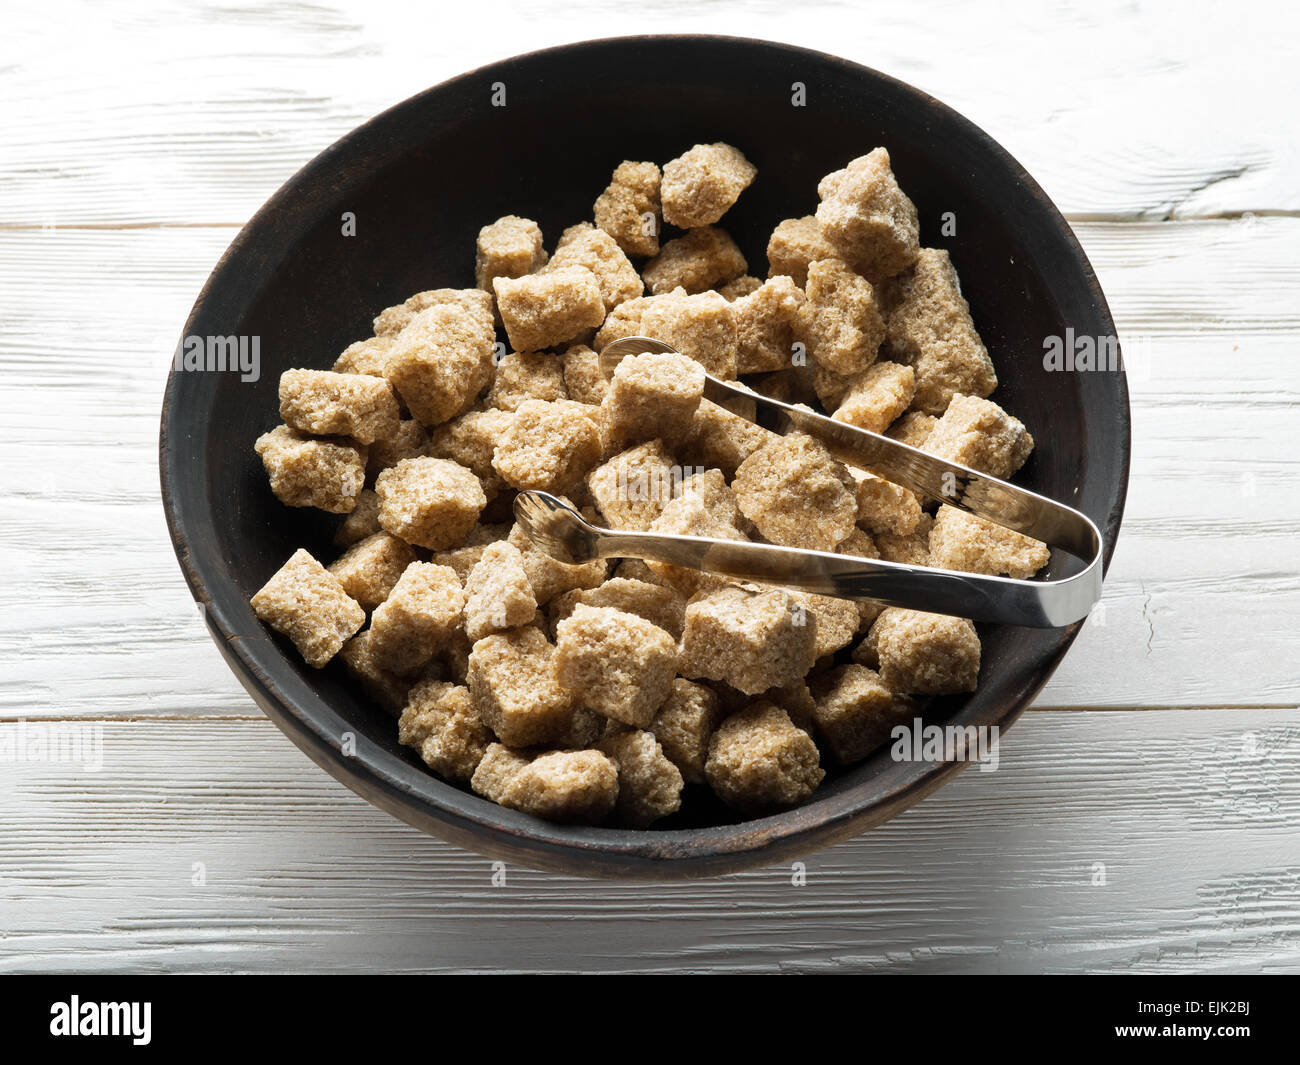 Cubes of cane sugar on wooden table. Stock Photo